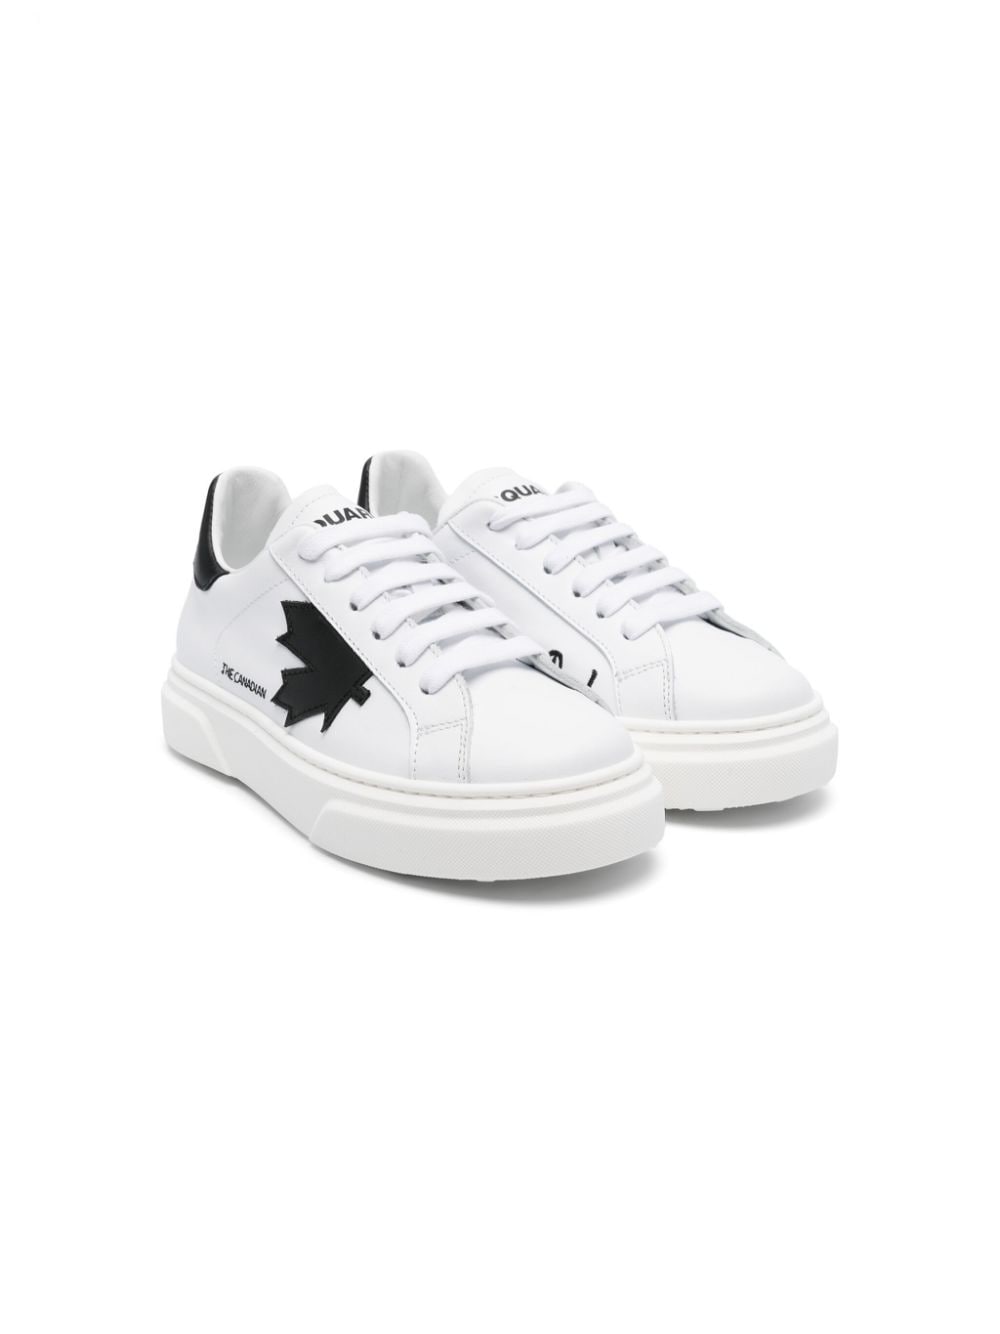 Dsquared2 Kids embroidered-motif sneakers - White von Dsquared2 Kids